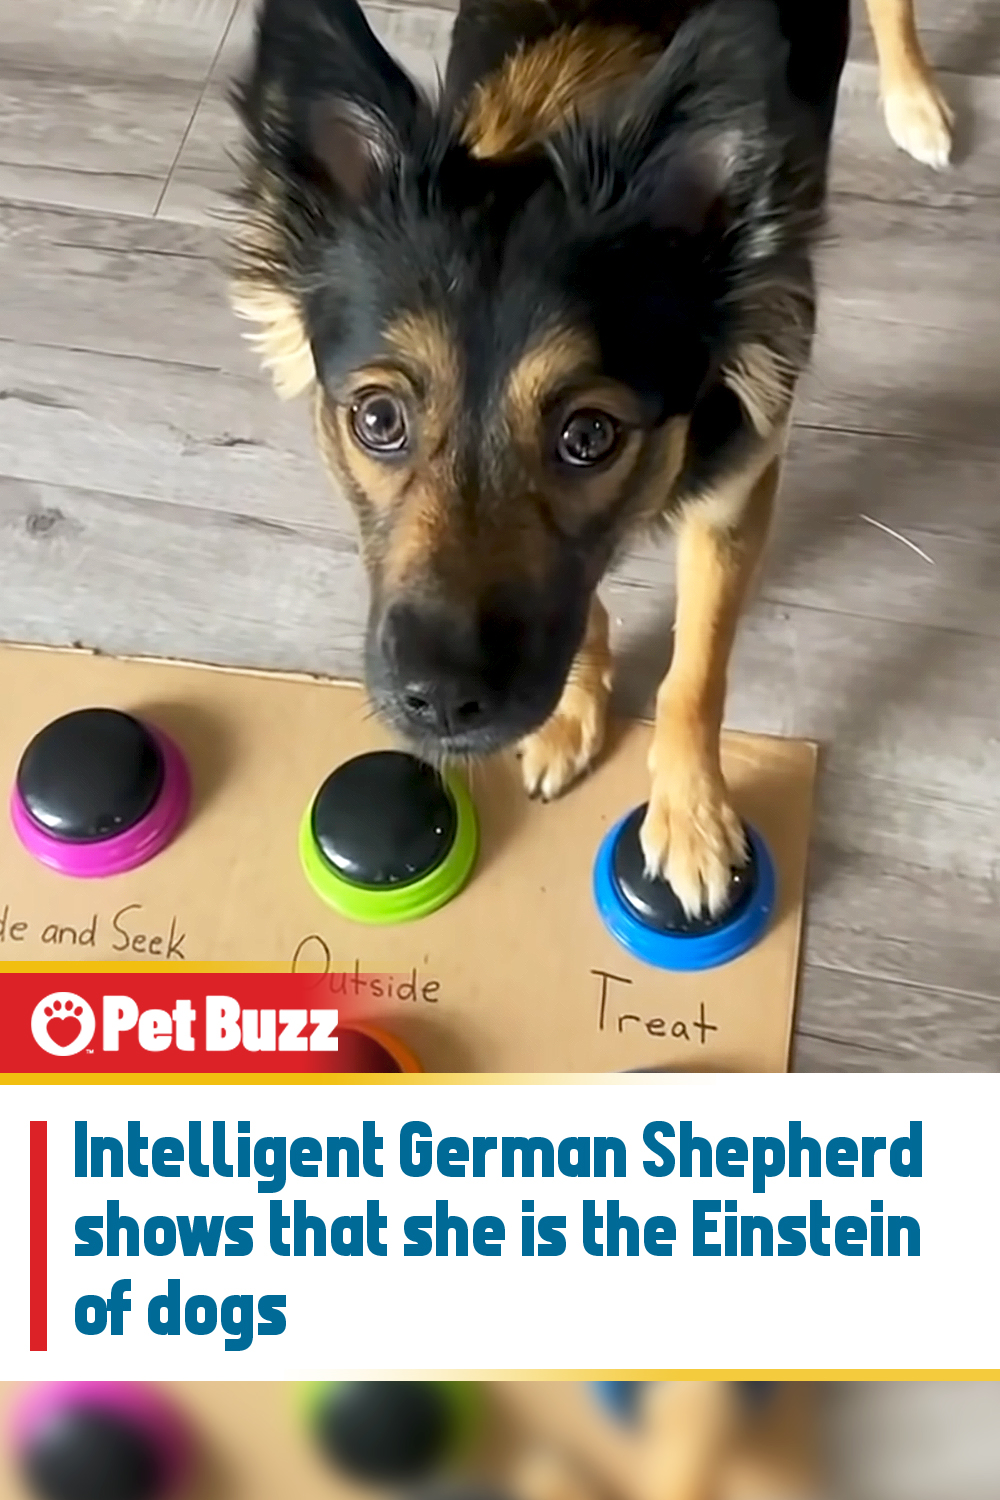 Intelligent German Shepherd shows that she is the Einstein of dogs